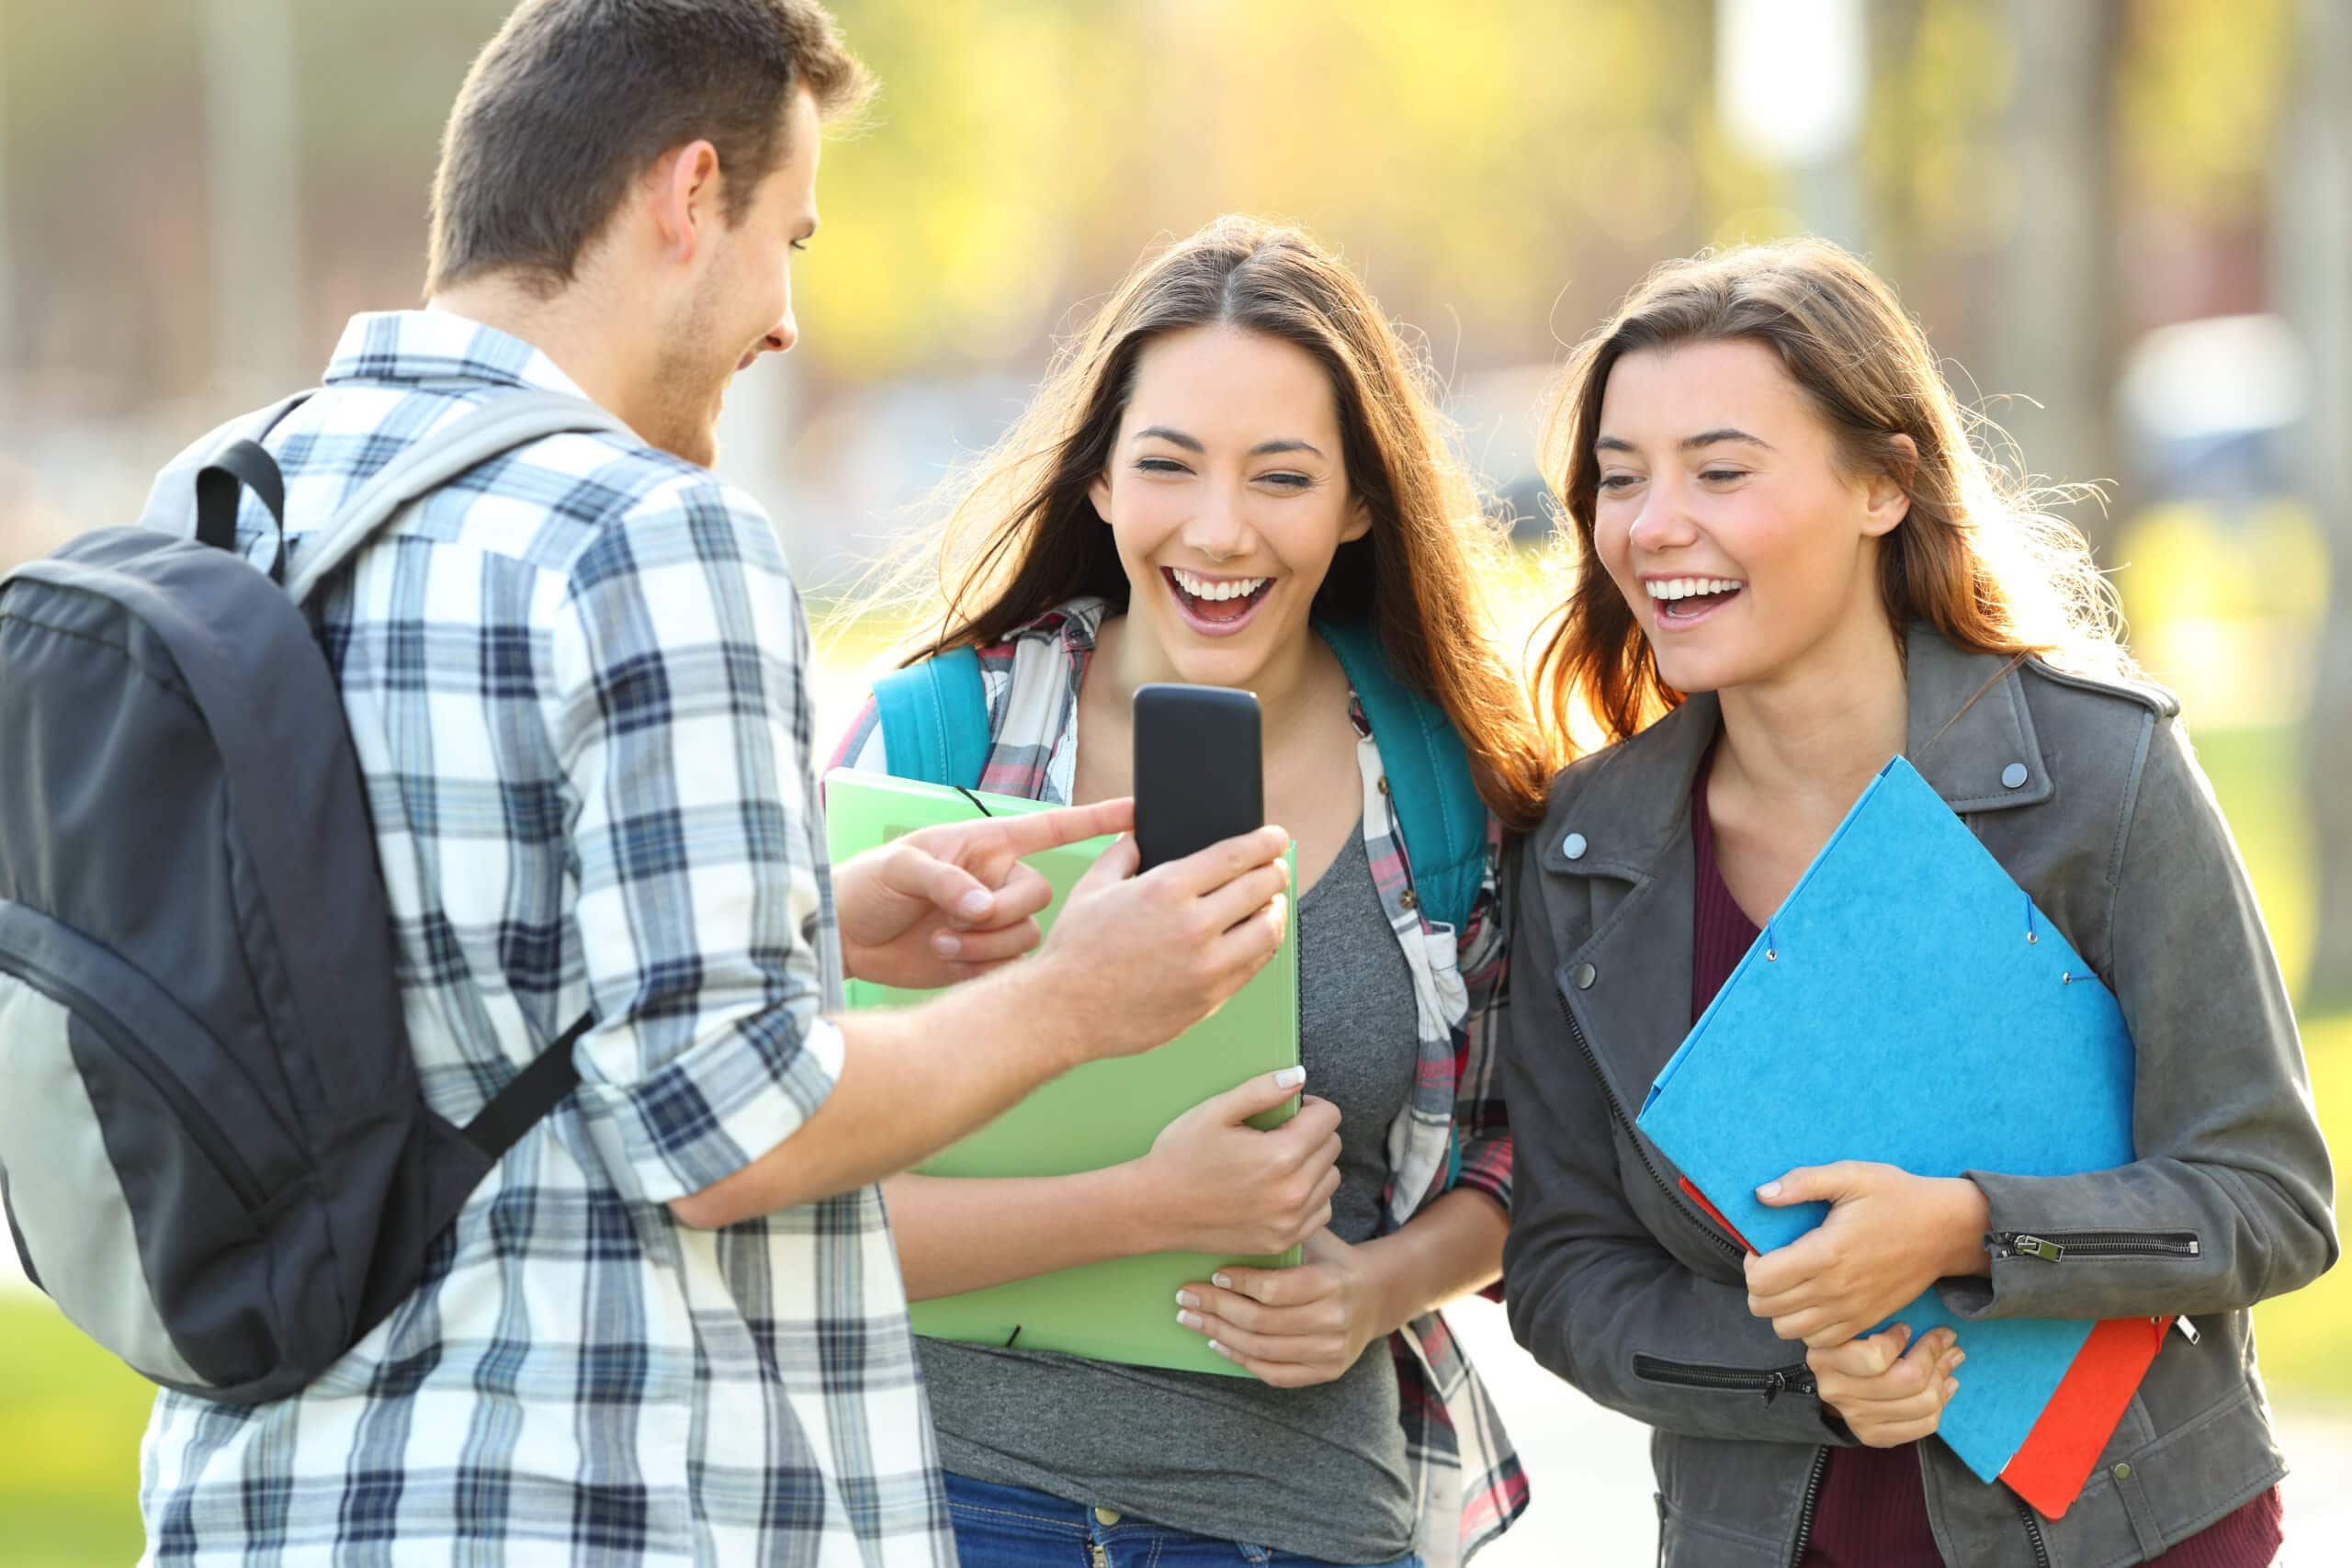 Three Students Sharing Phone Content In A Park